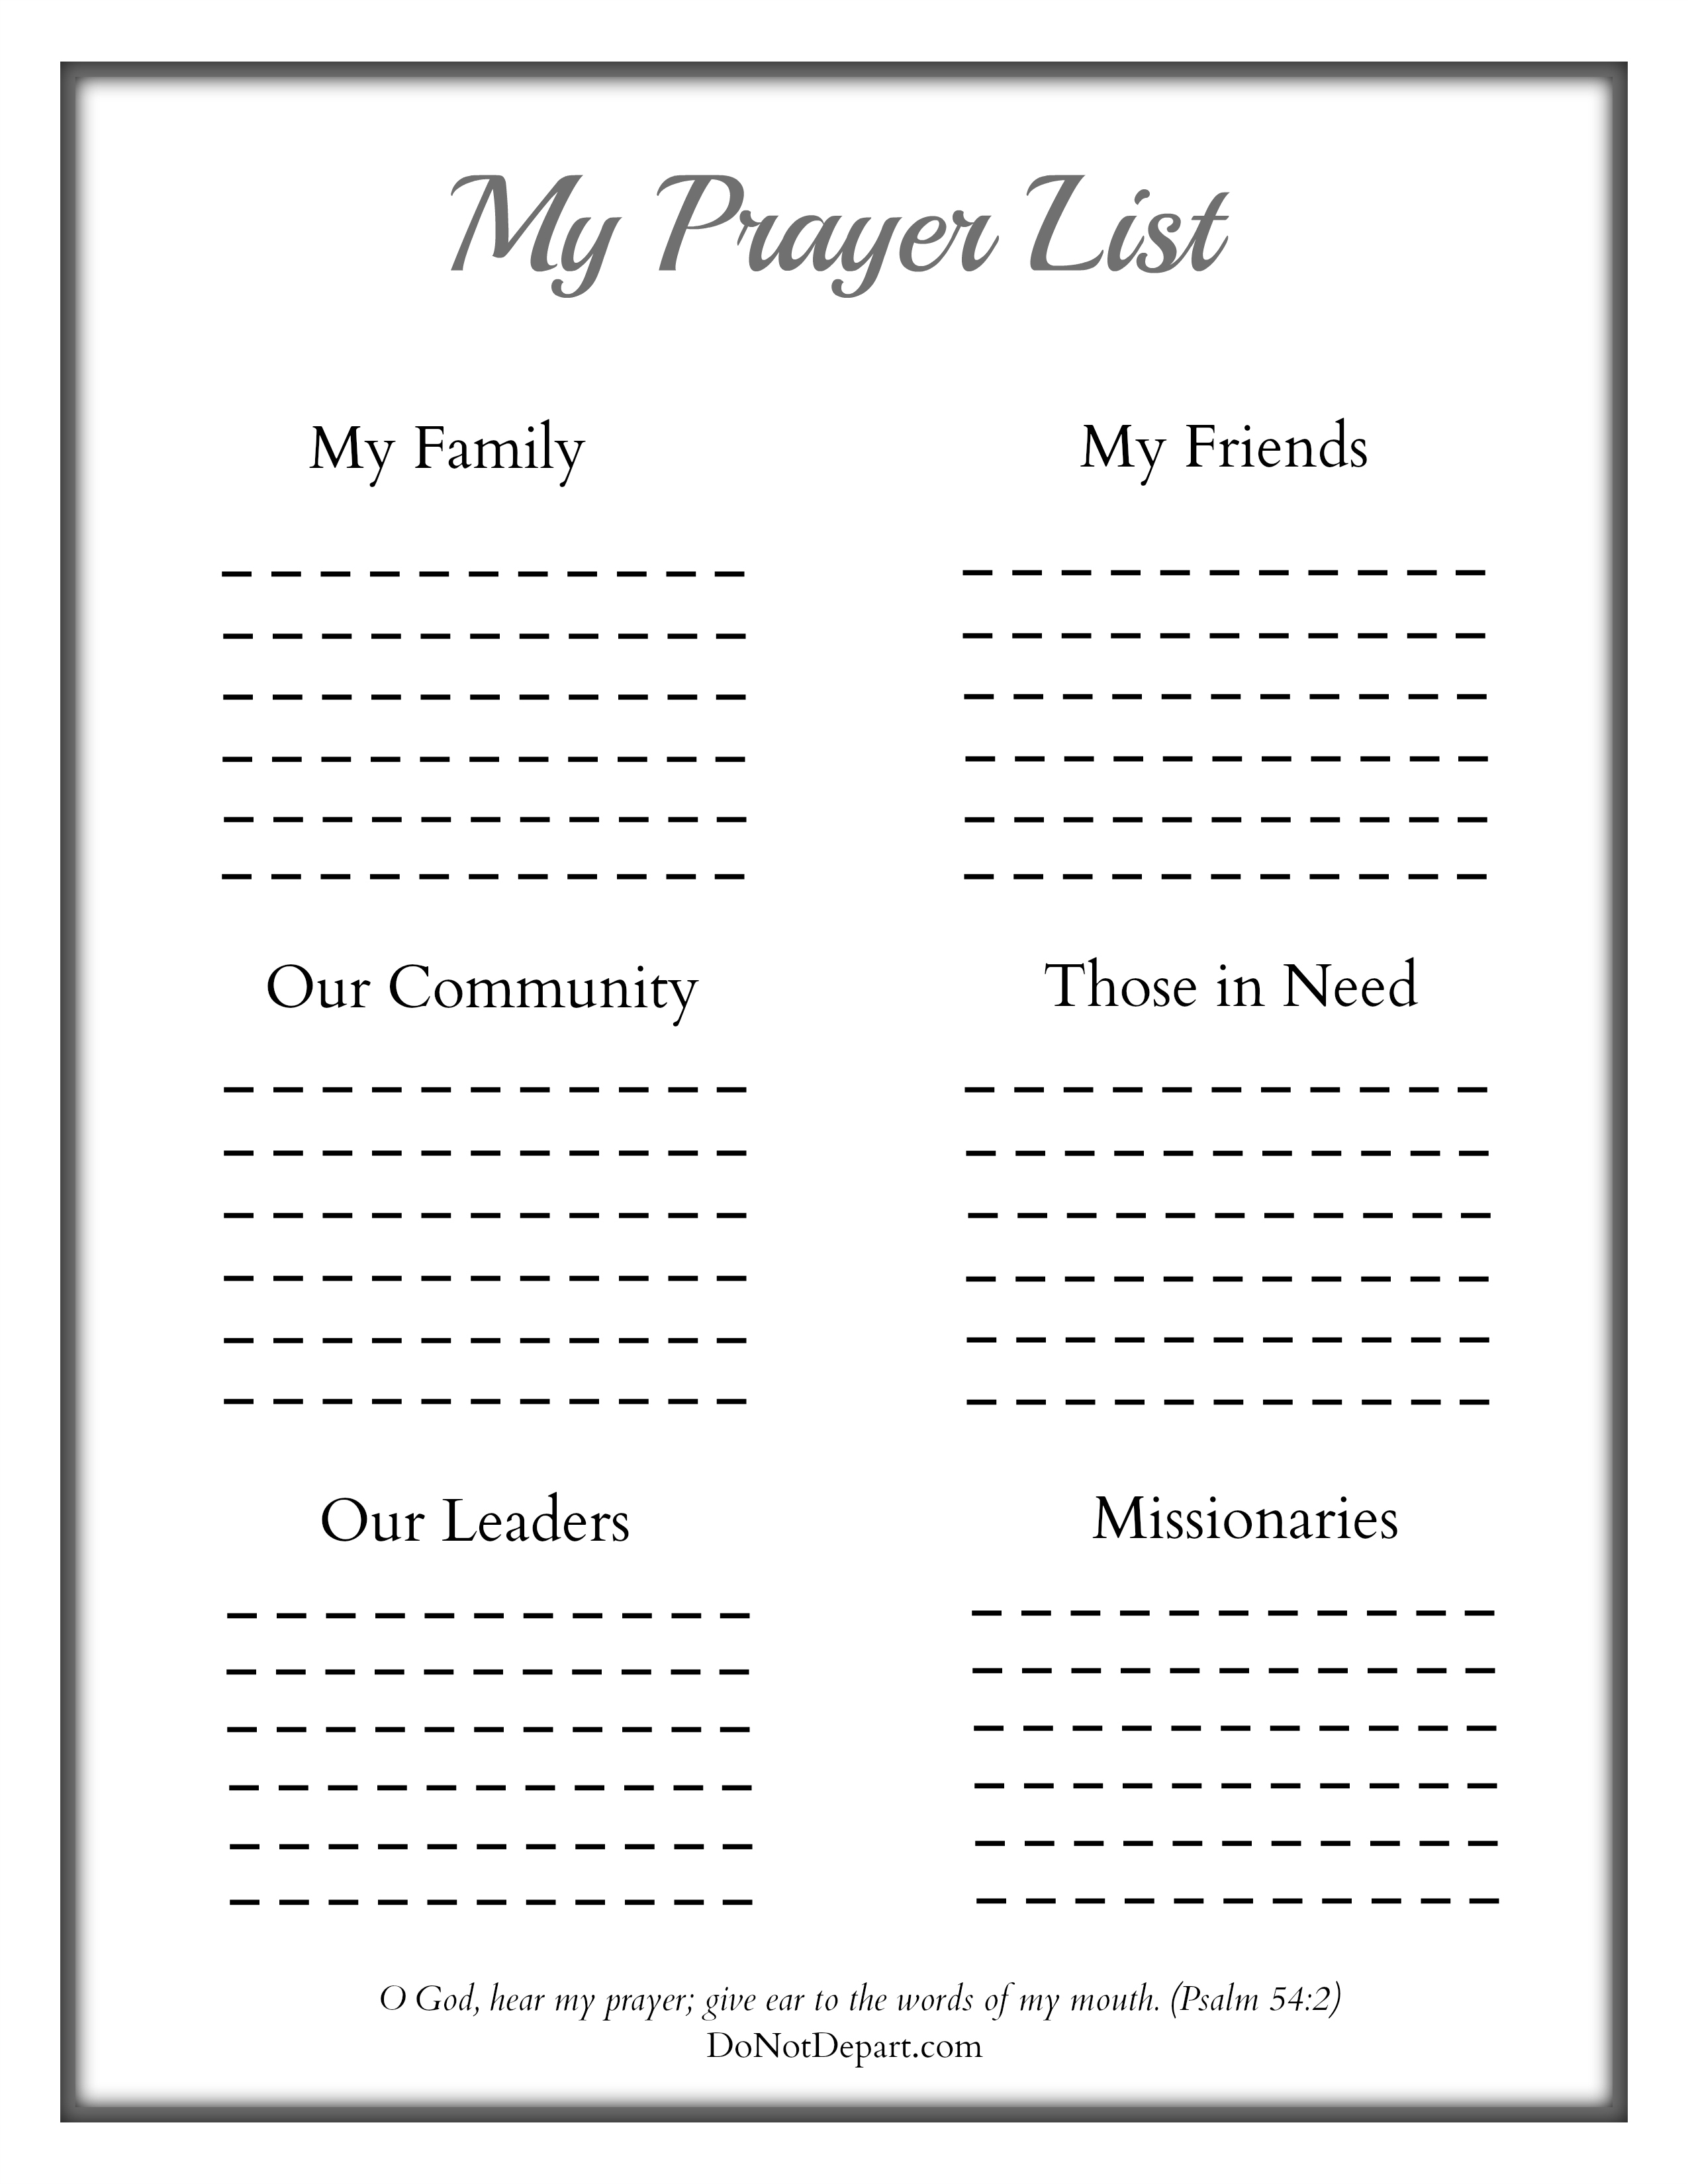 Print this simple prayer list template to help your children keep track of people they want to pray for. DoNotDepart.com